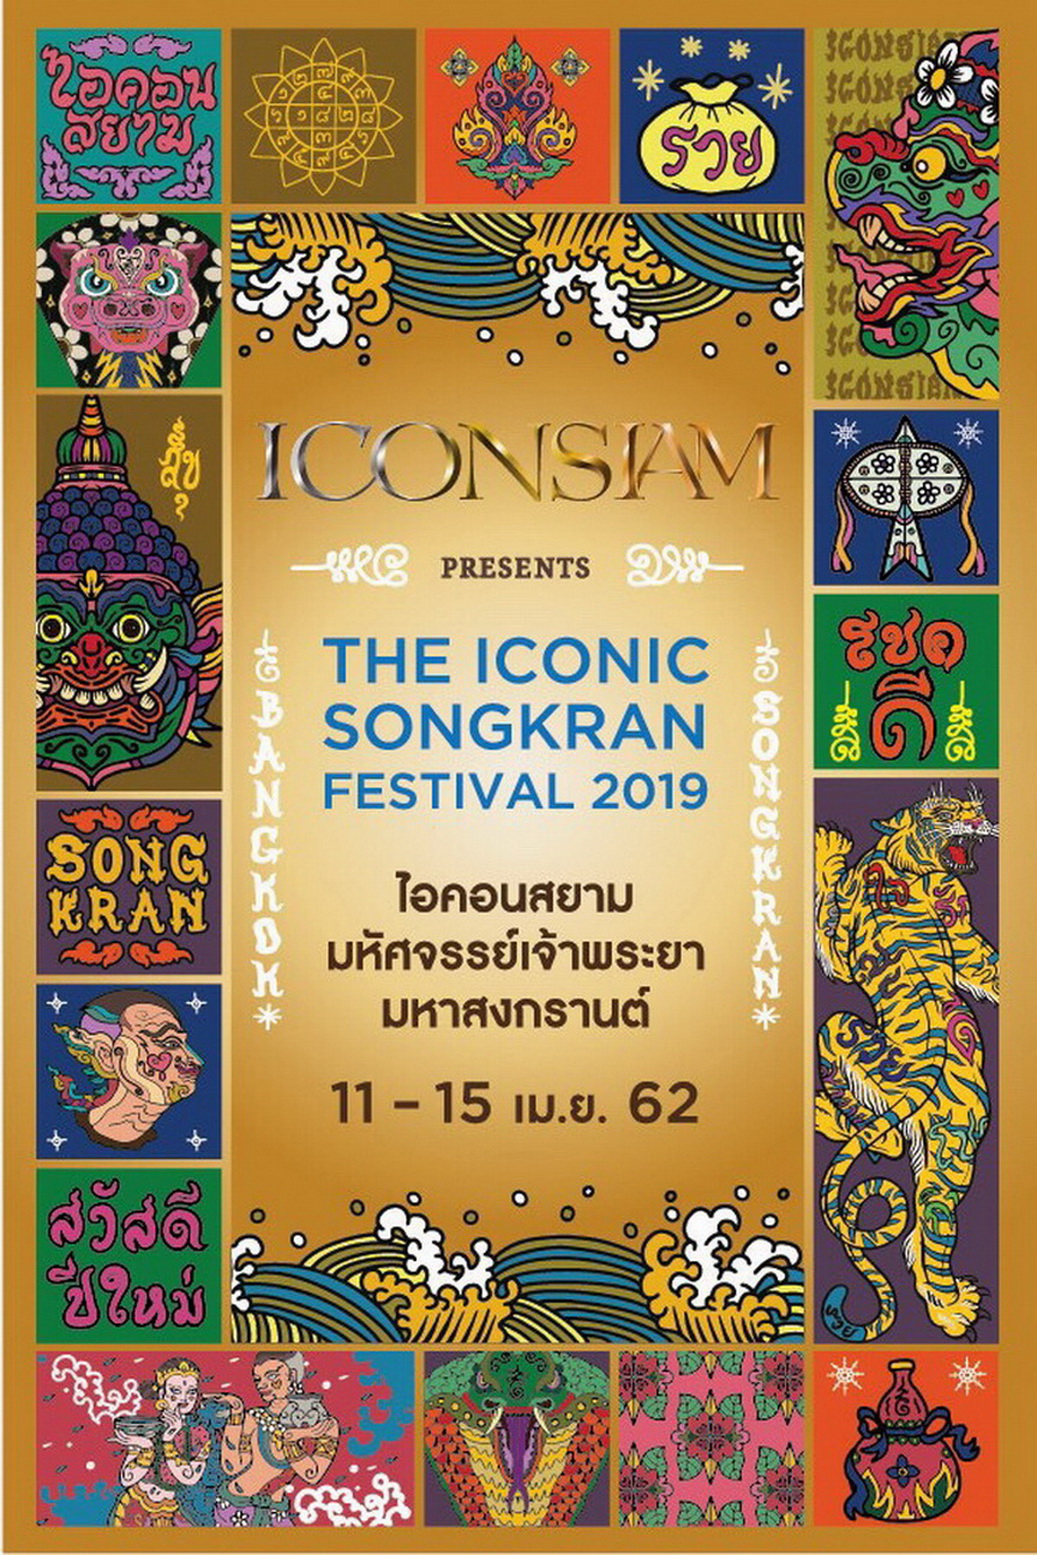 The ICONIC Songkran Festival 2019 at ICONSIAM